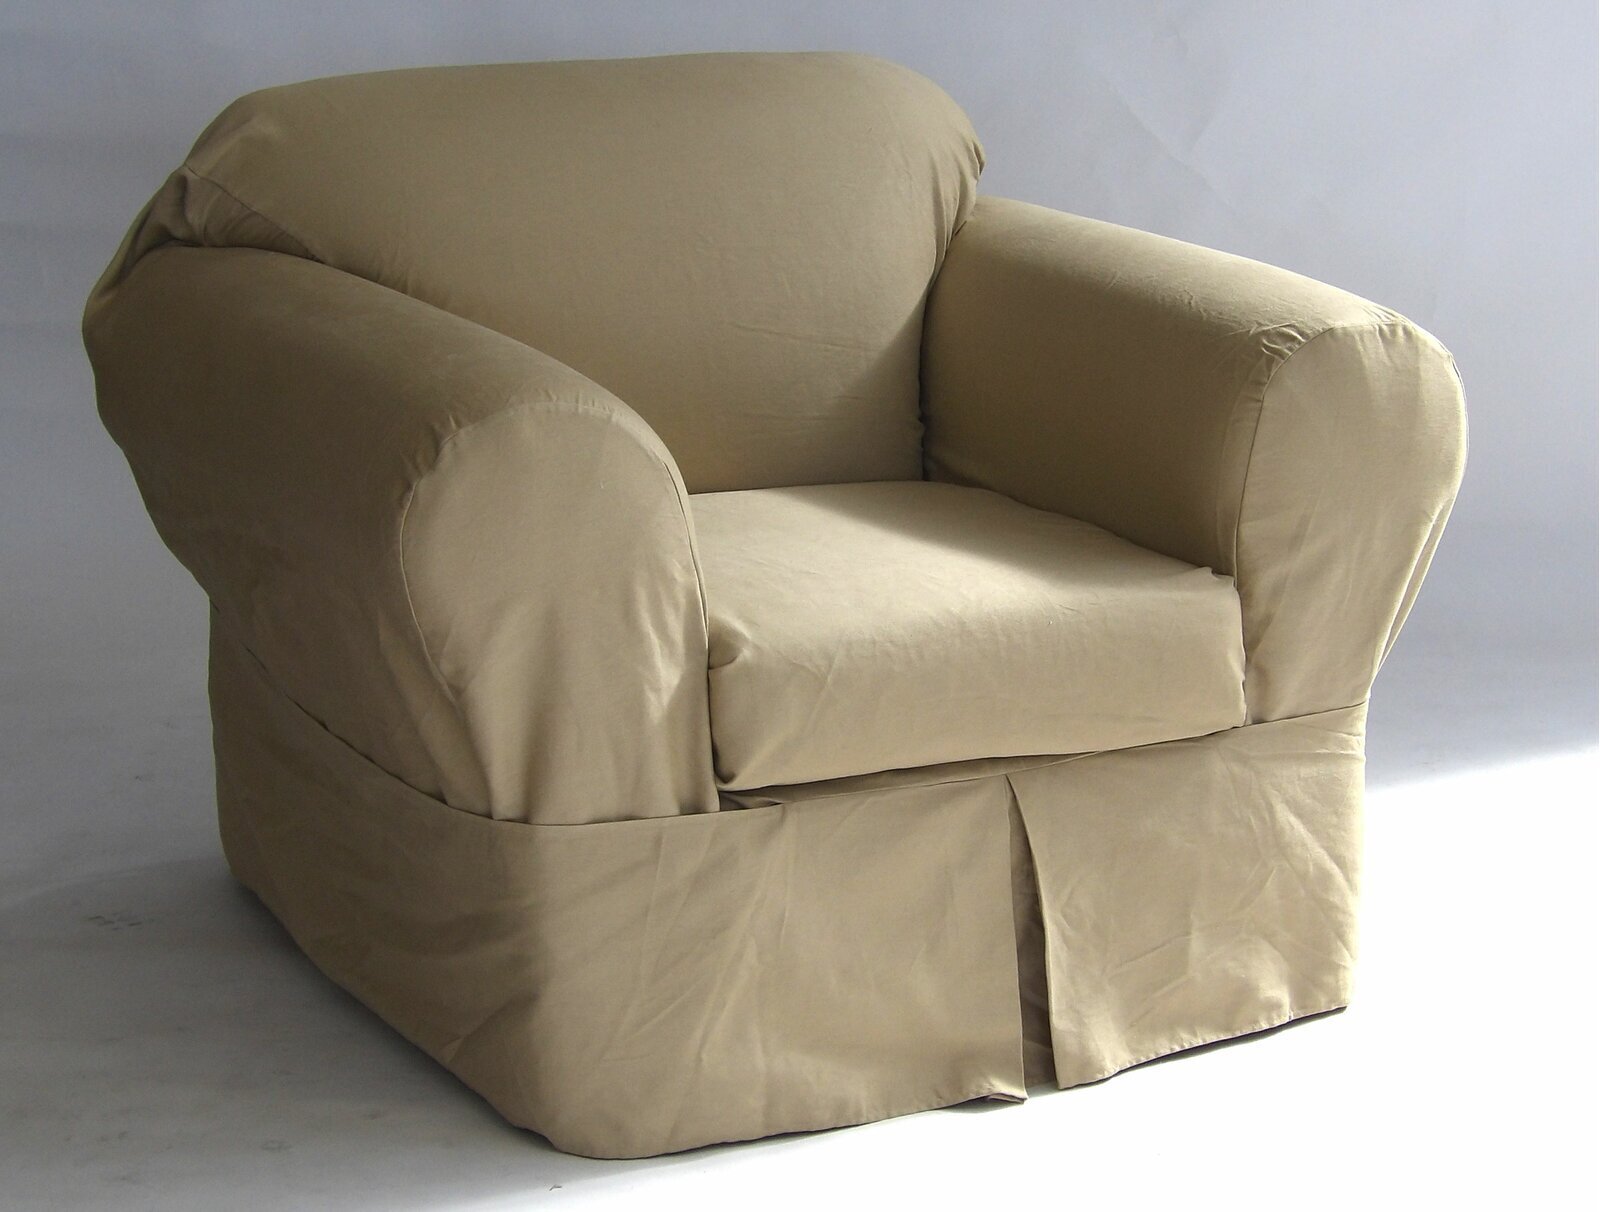 Oversized Club Chair Slipcover With Skirt